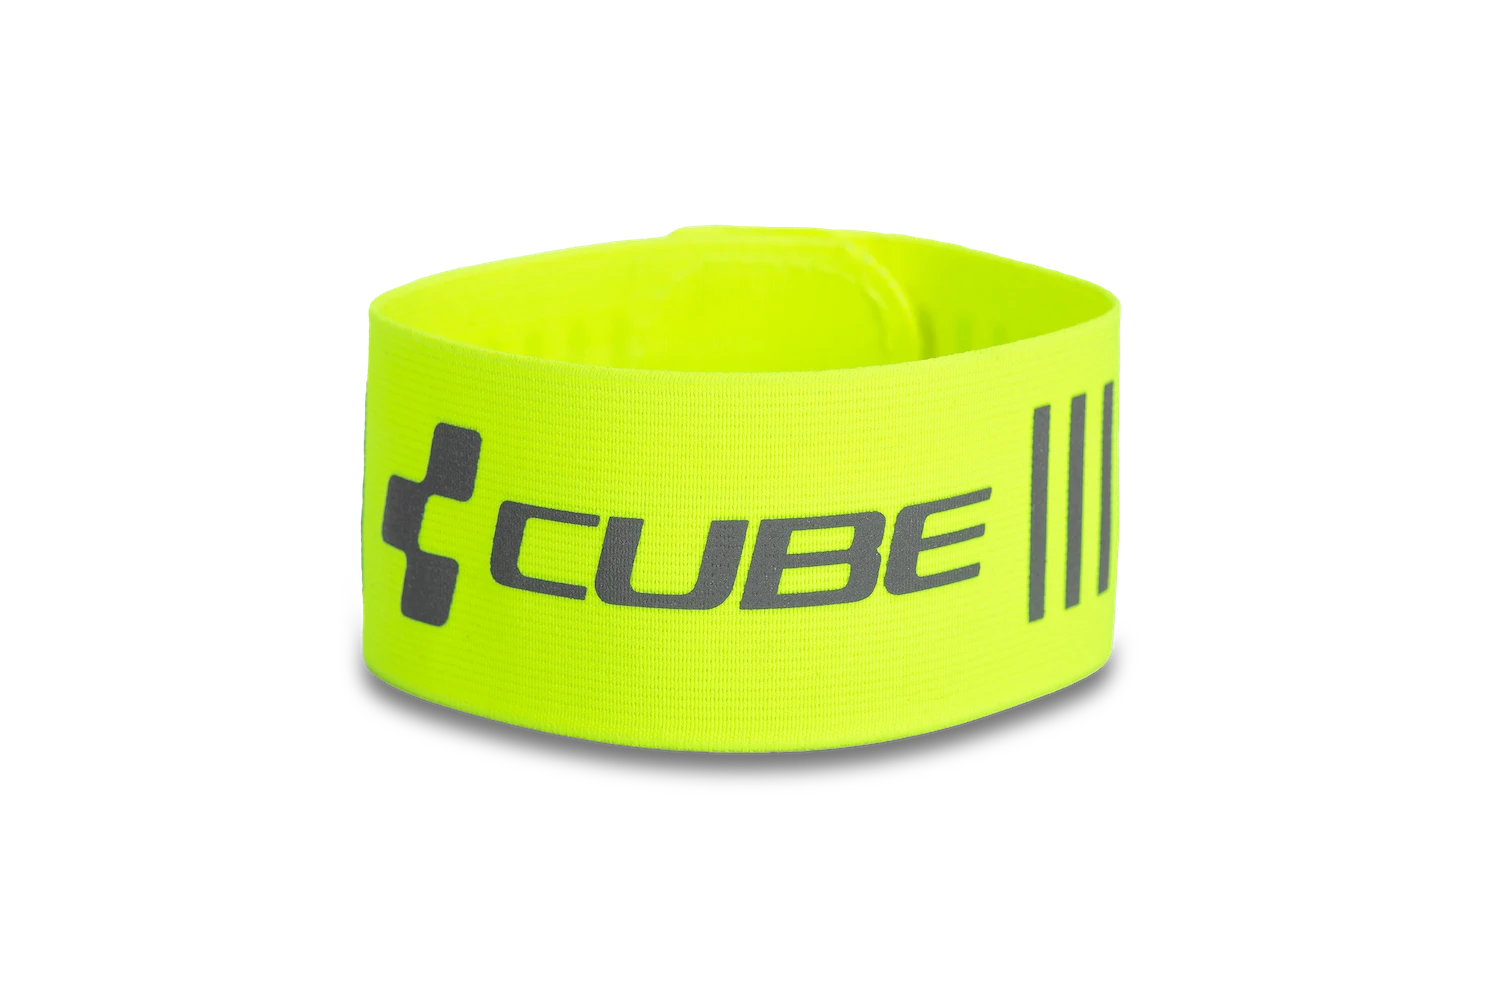 CUBE Safety Band